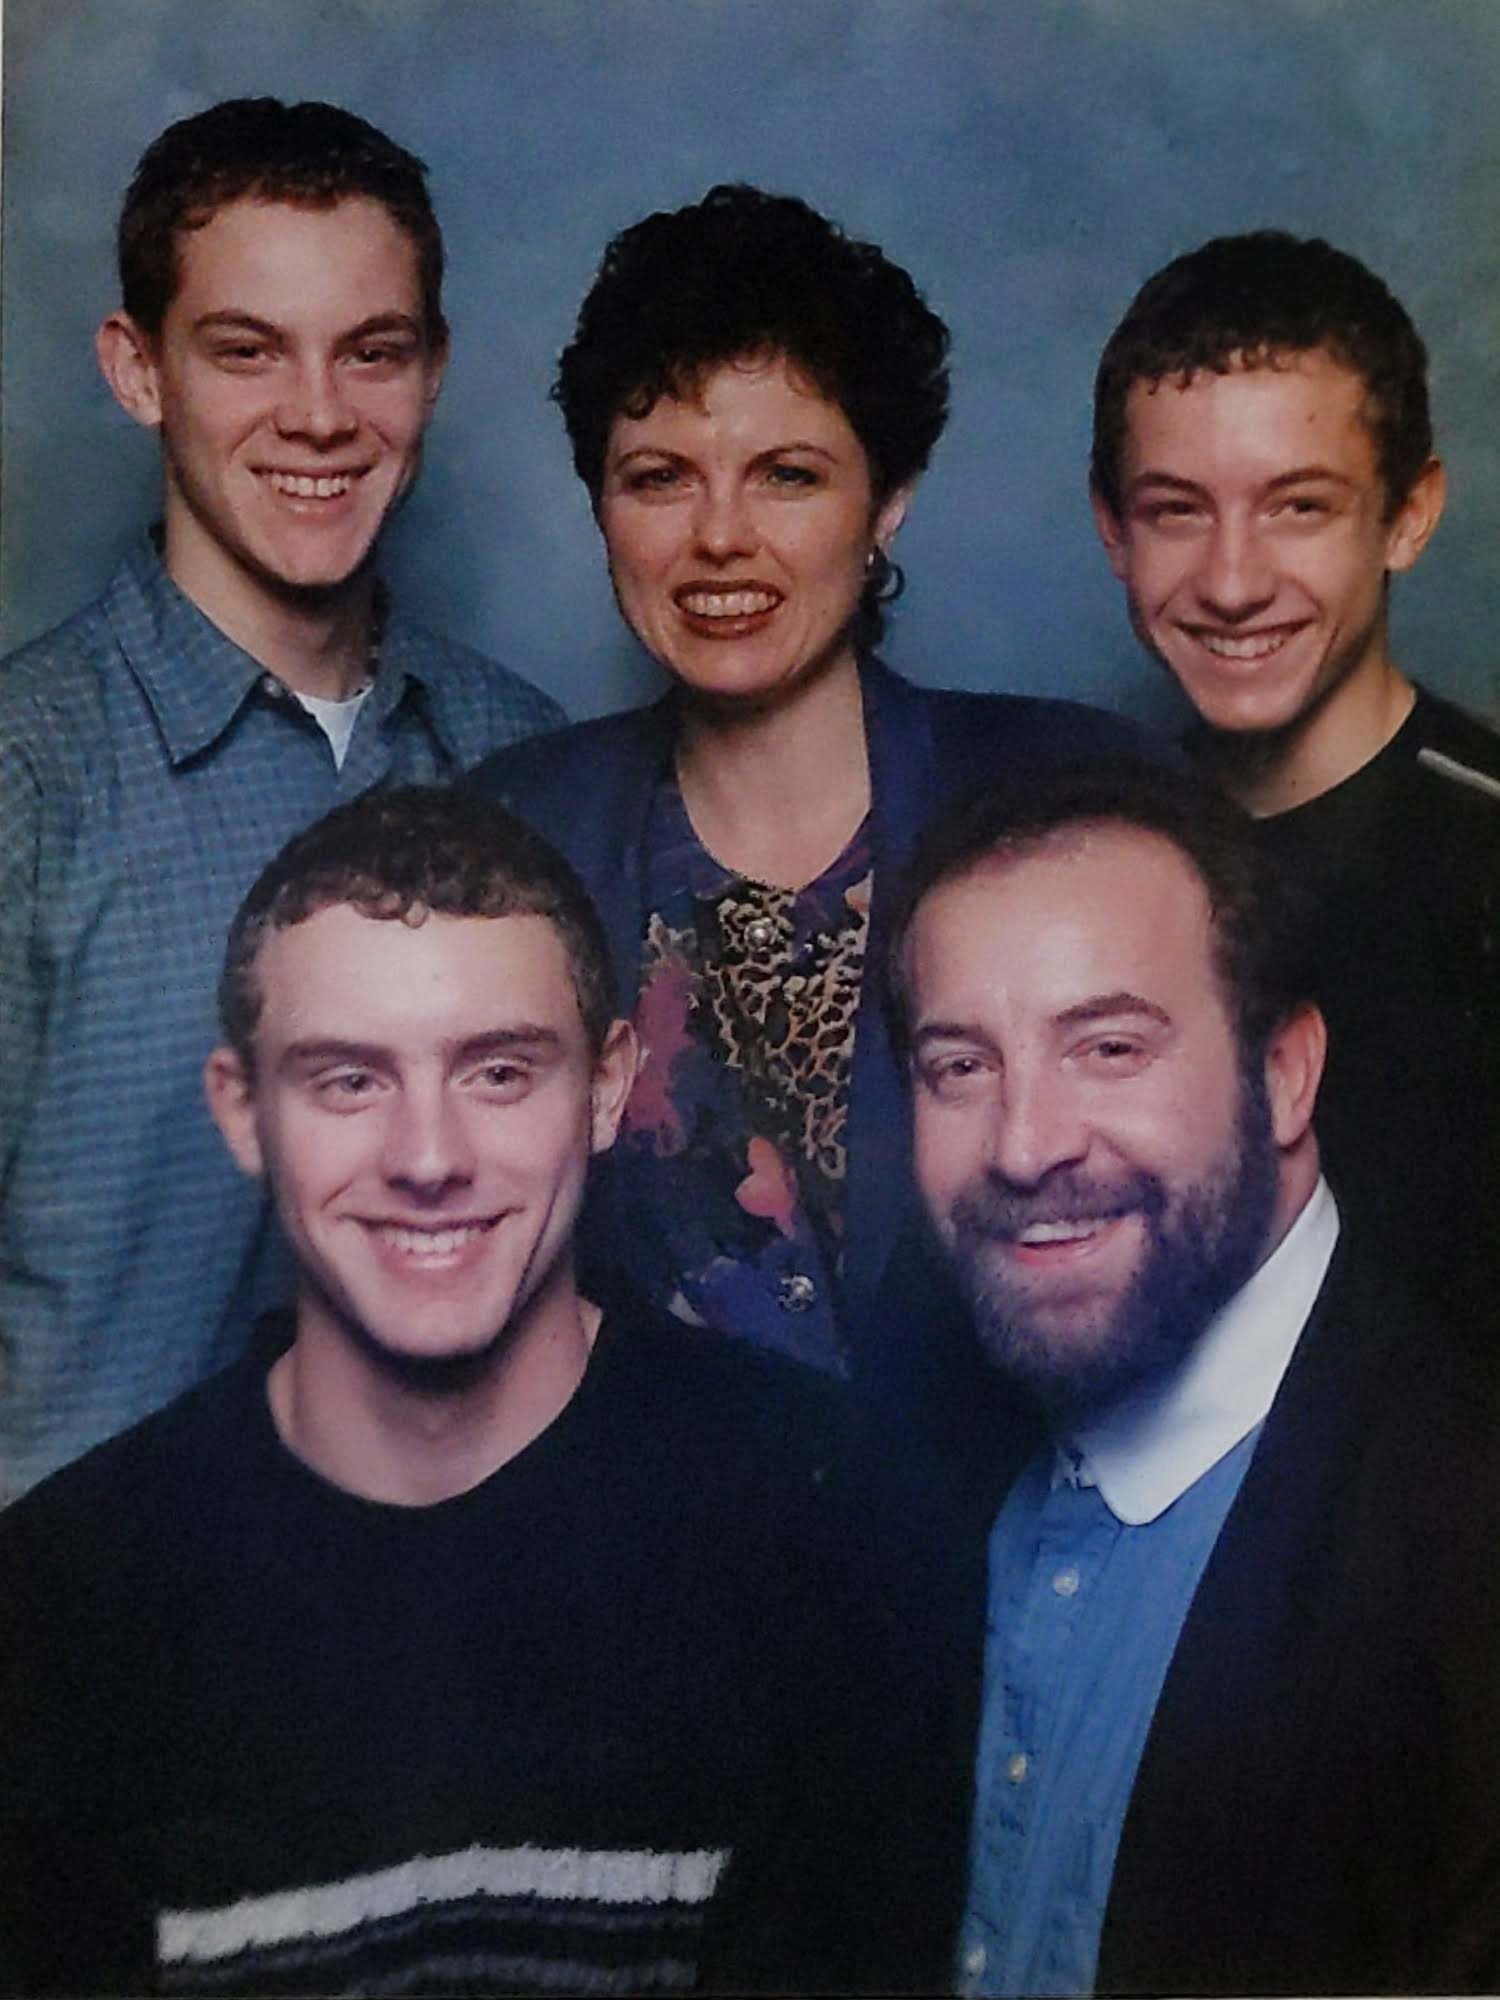 A family photo of Doug with his brothers and parents